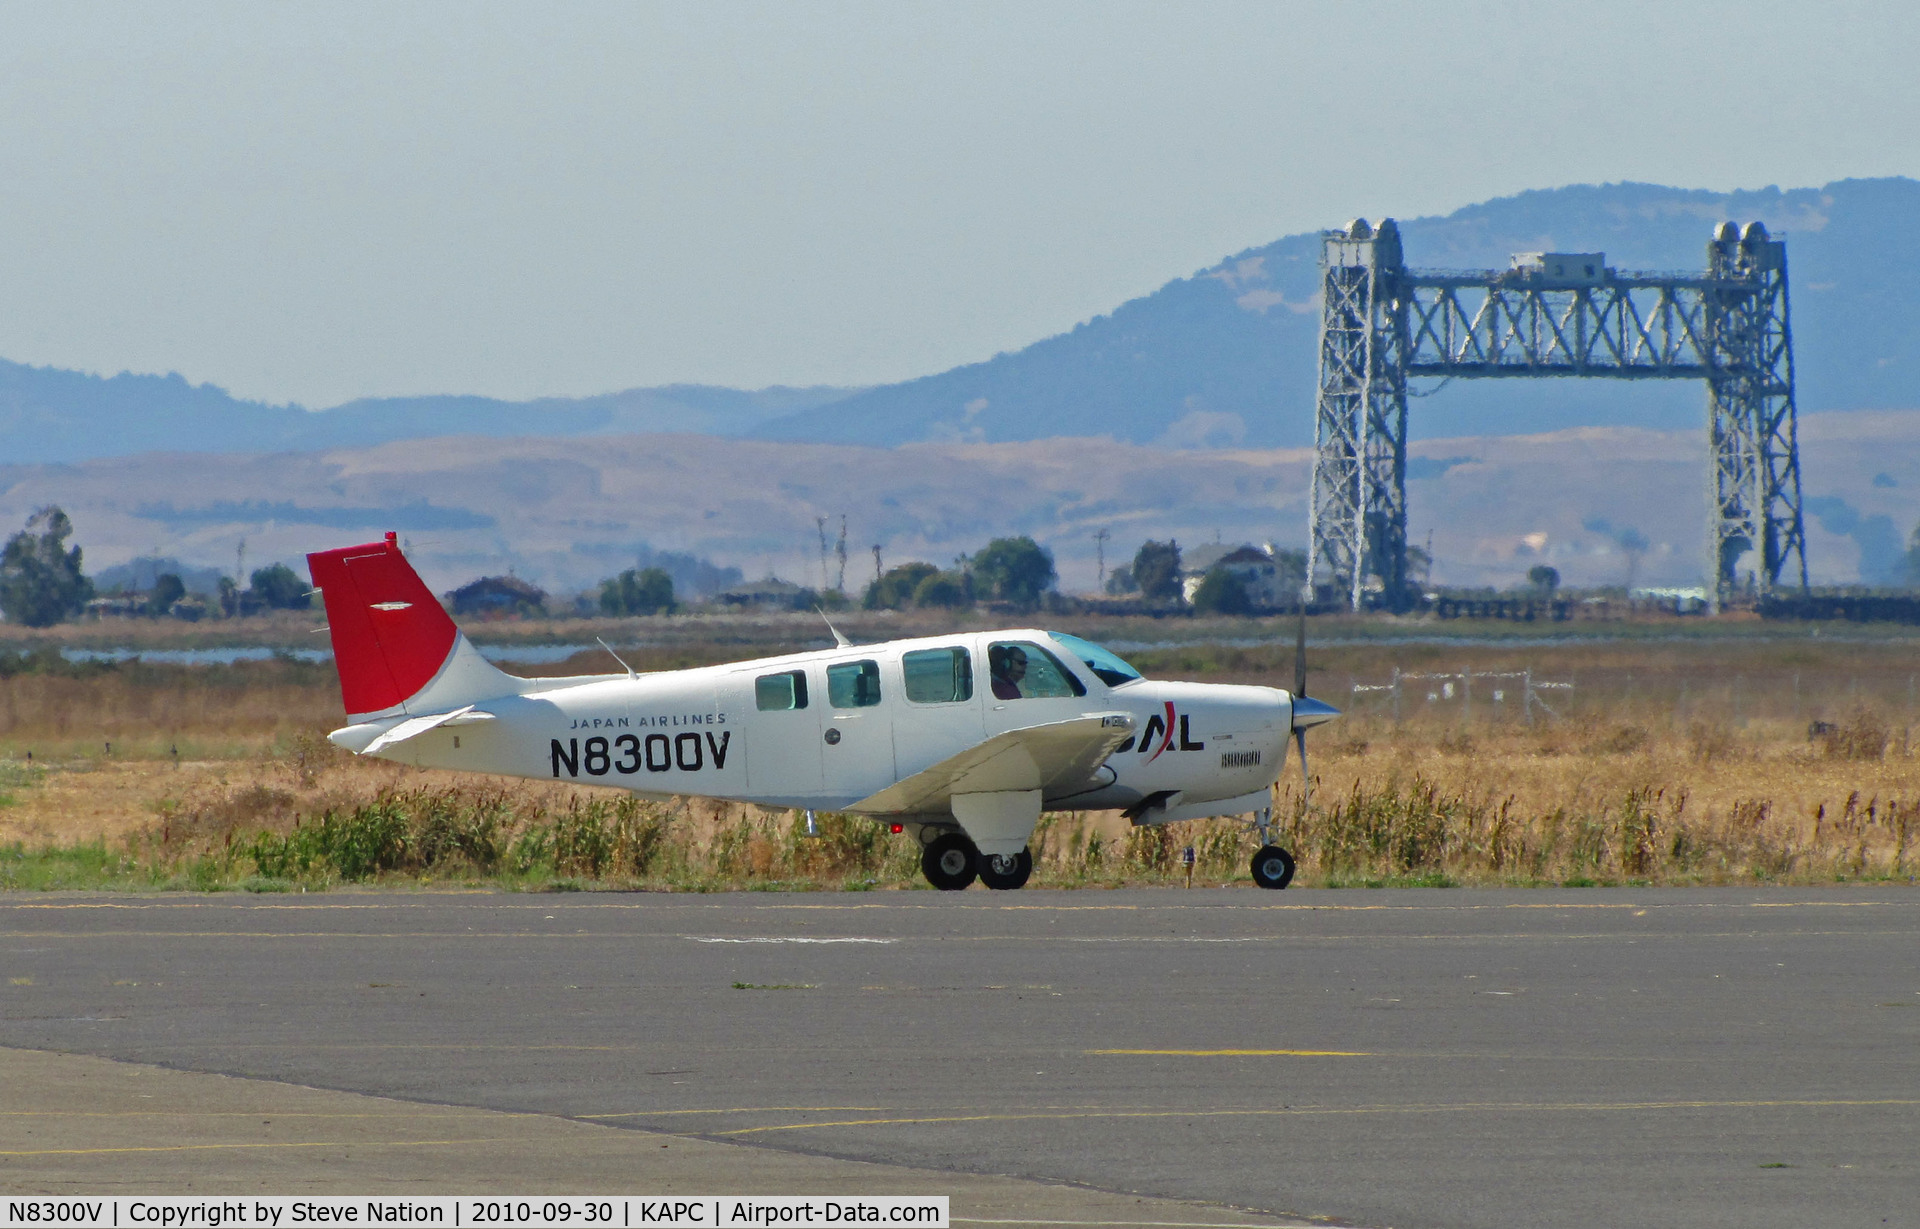 N8300V, 1992 Beech A36 Bonanza 36 C/N E-2767, Japan Airlines 1992 Beech A36 (now in new colors) taxiing by Napa River RR bridge